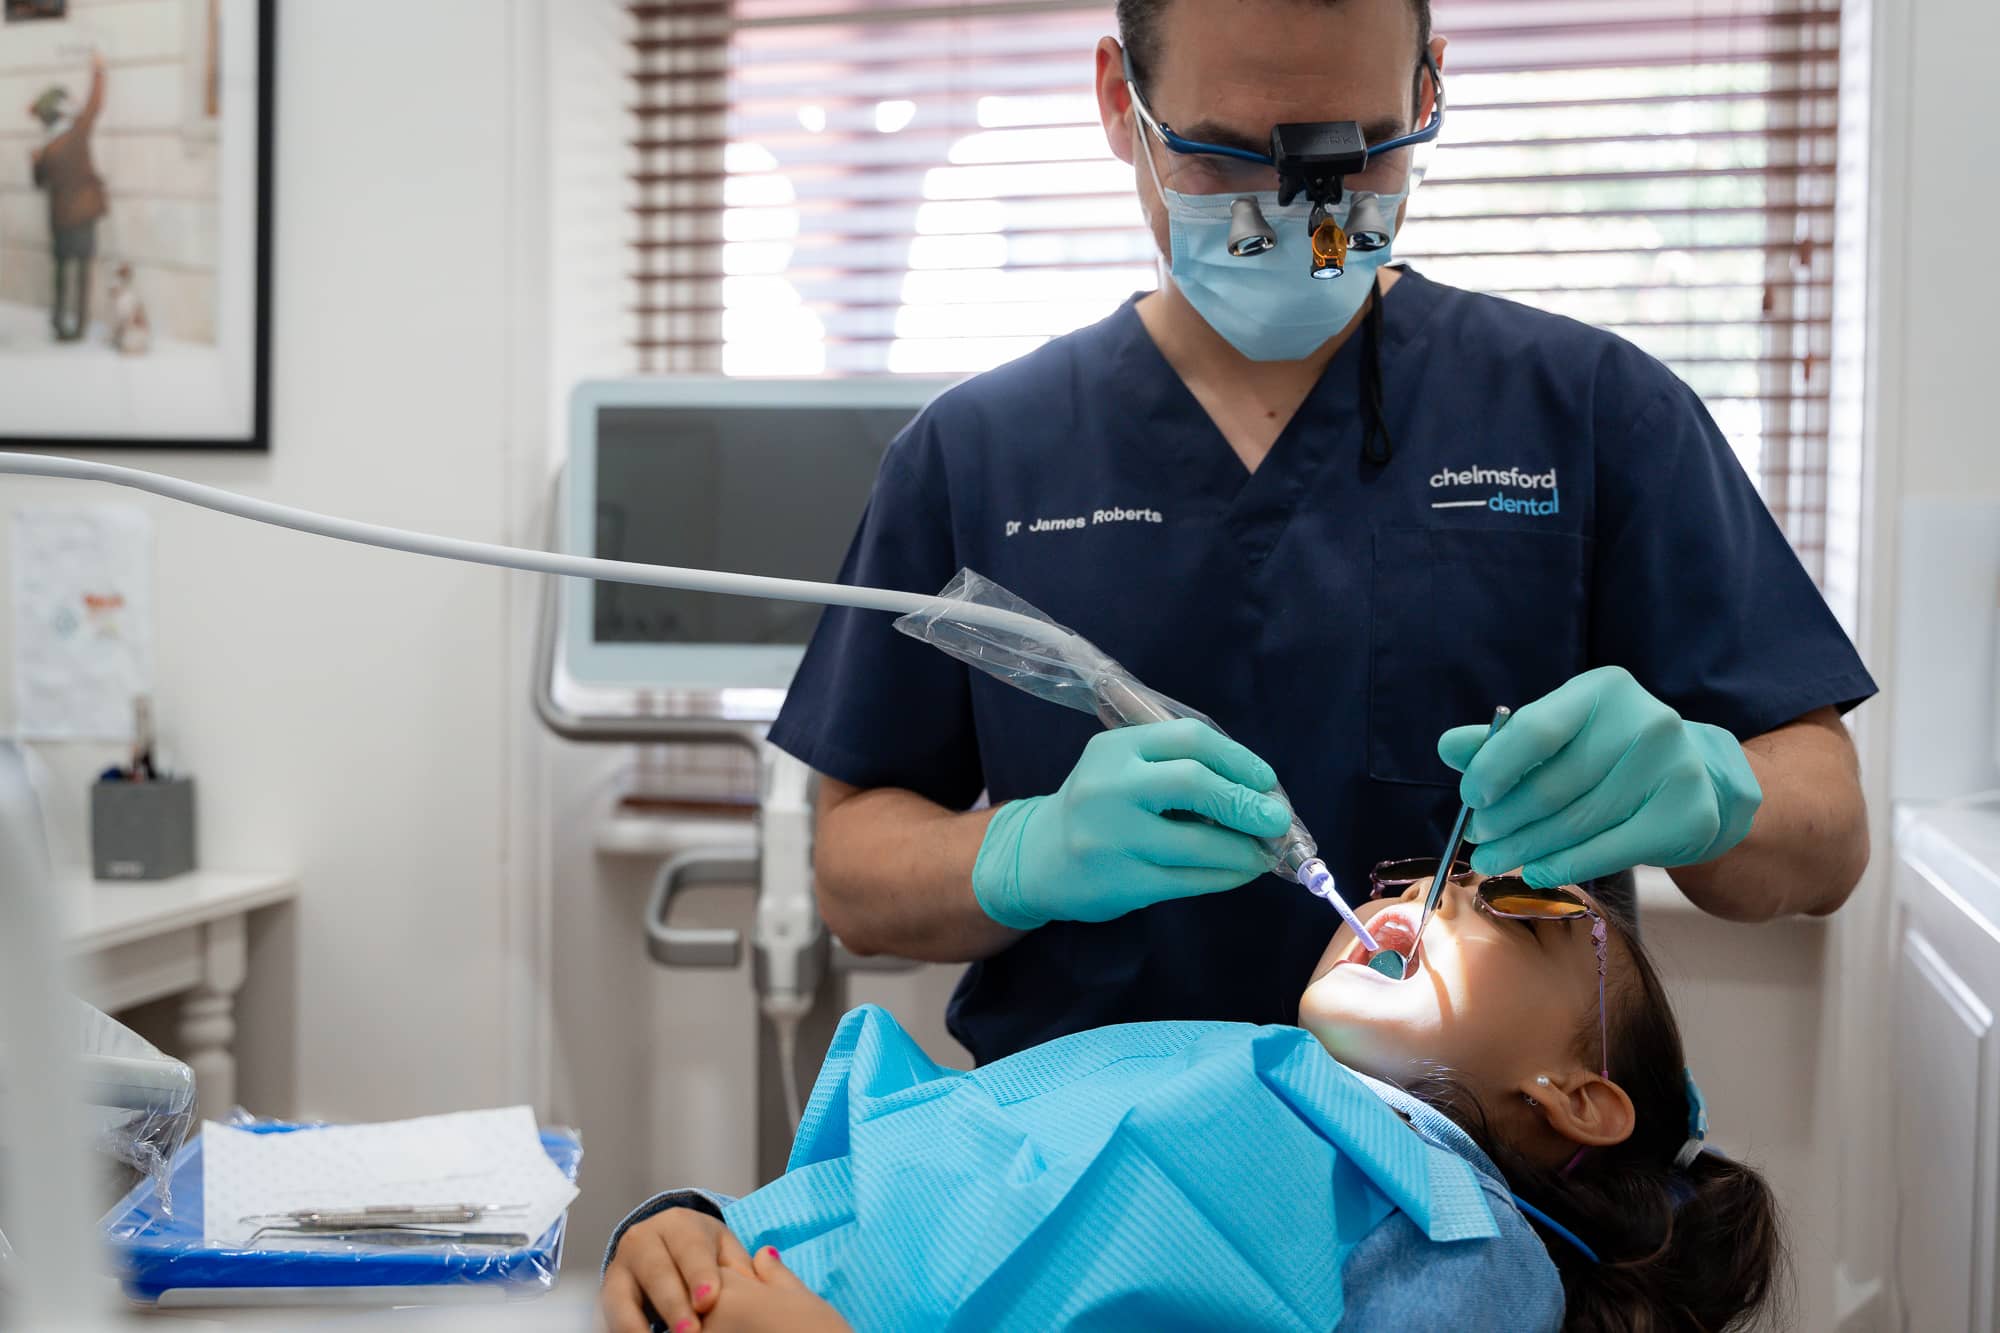 dentist cleaning child teeth at dental clinic